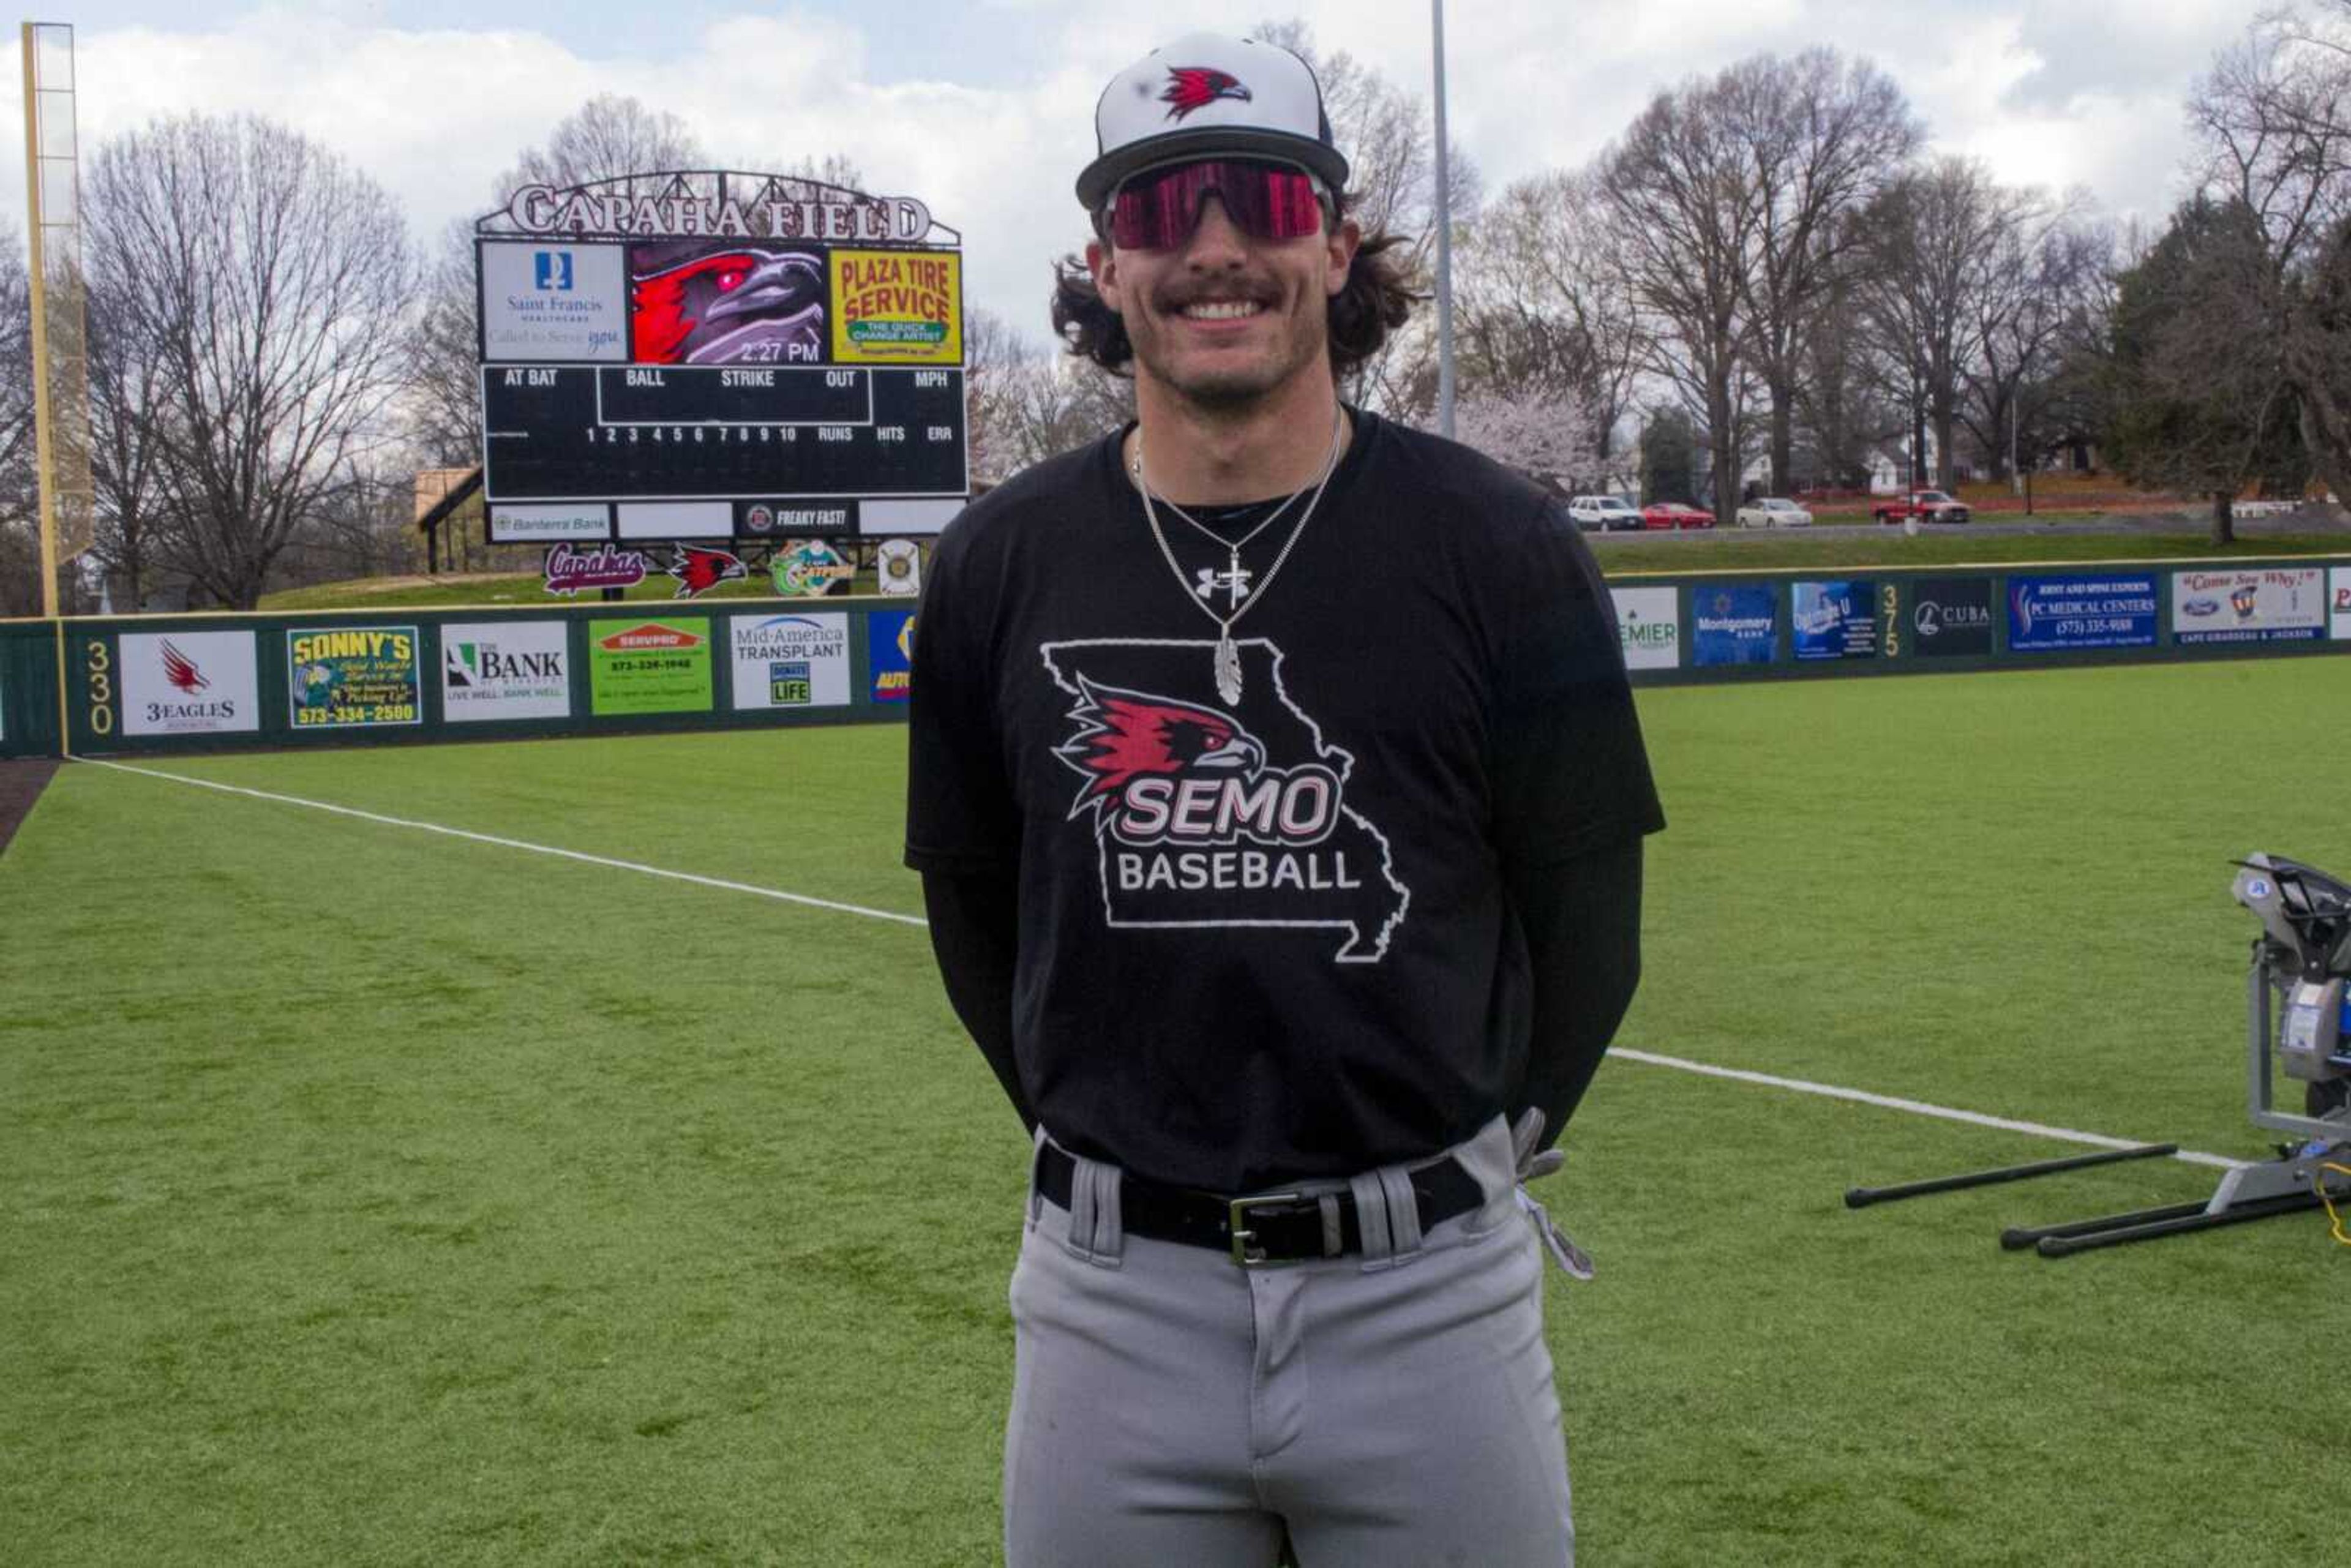 Junior outfielder and JUCO transfer Josh Cameron stands on the Southeast Missouri State University baseball field. Cameron described what makes SEMO baseball so special and what has been the key to his success so far this season.